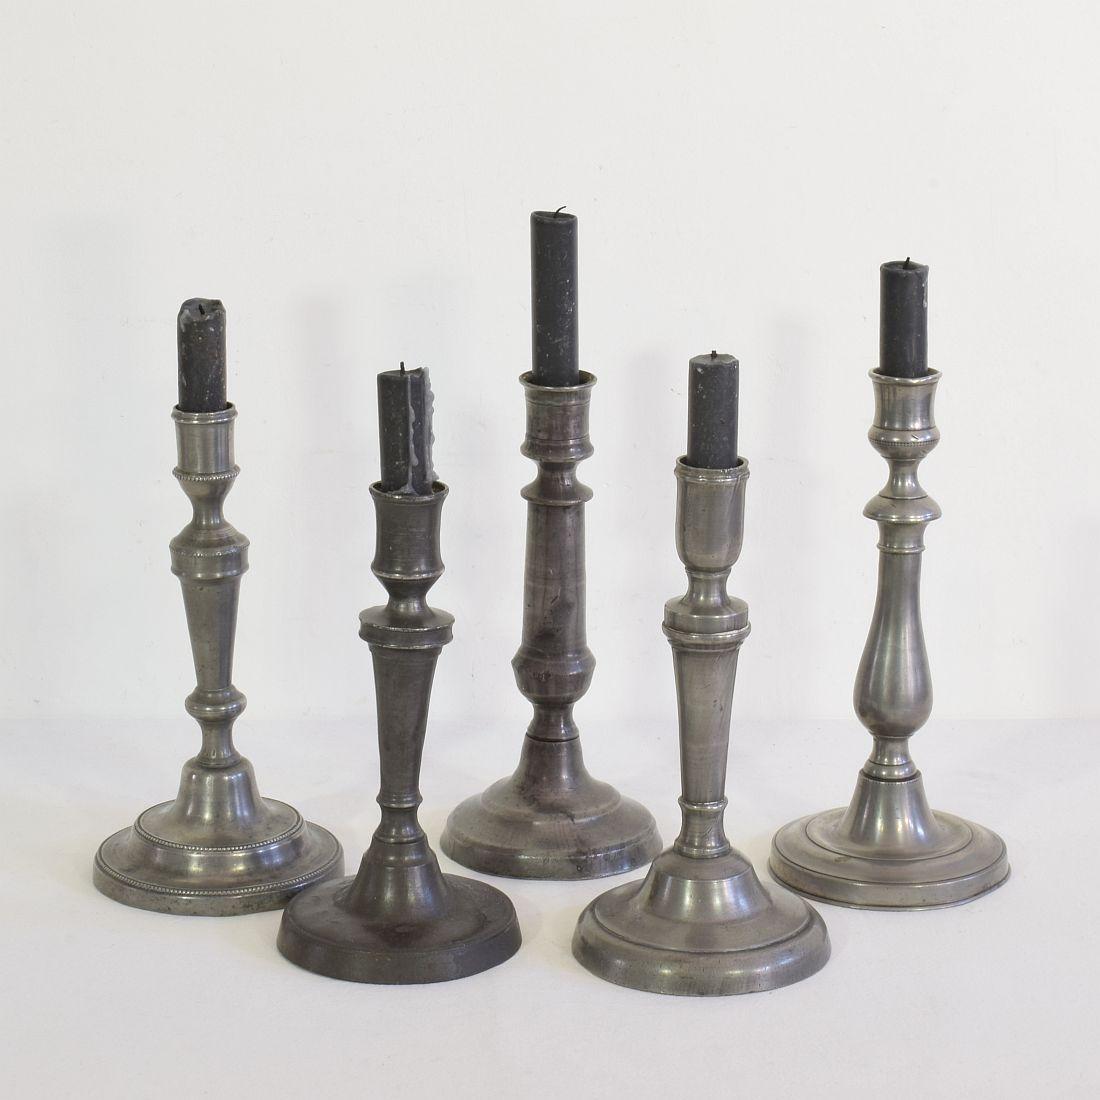 Amazing collection of five pewter candlesticks. They are all different and unique,
France, circa 1750-1850.
Weathered, dented and small losses but these imperfections help authenticate these items as they were utilitarian type pieces
Measures: H: